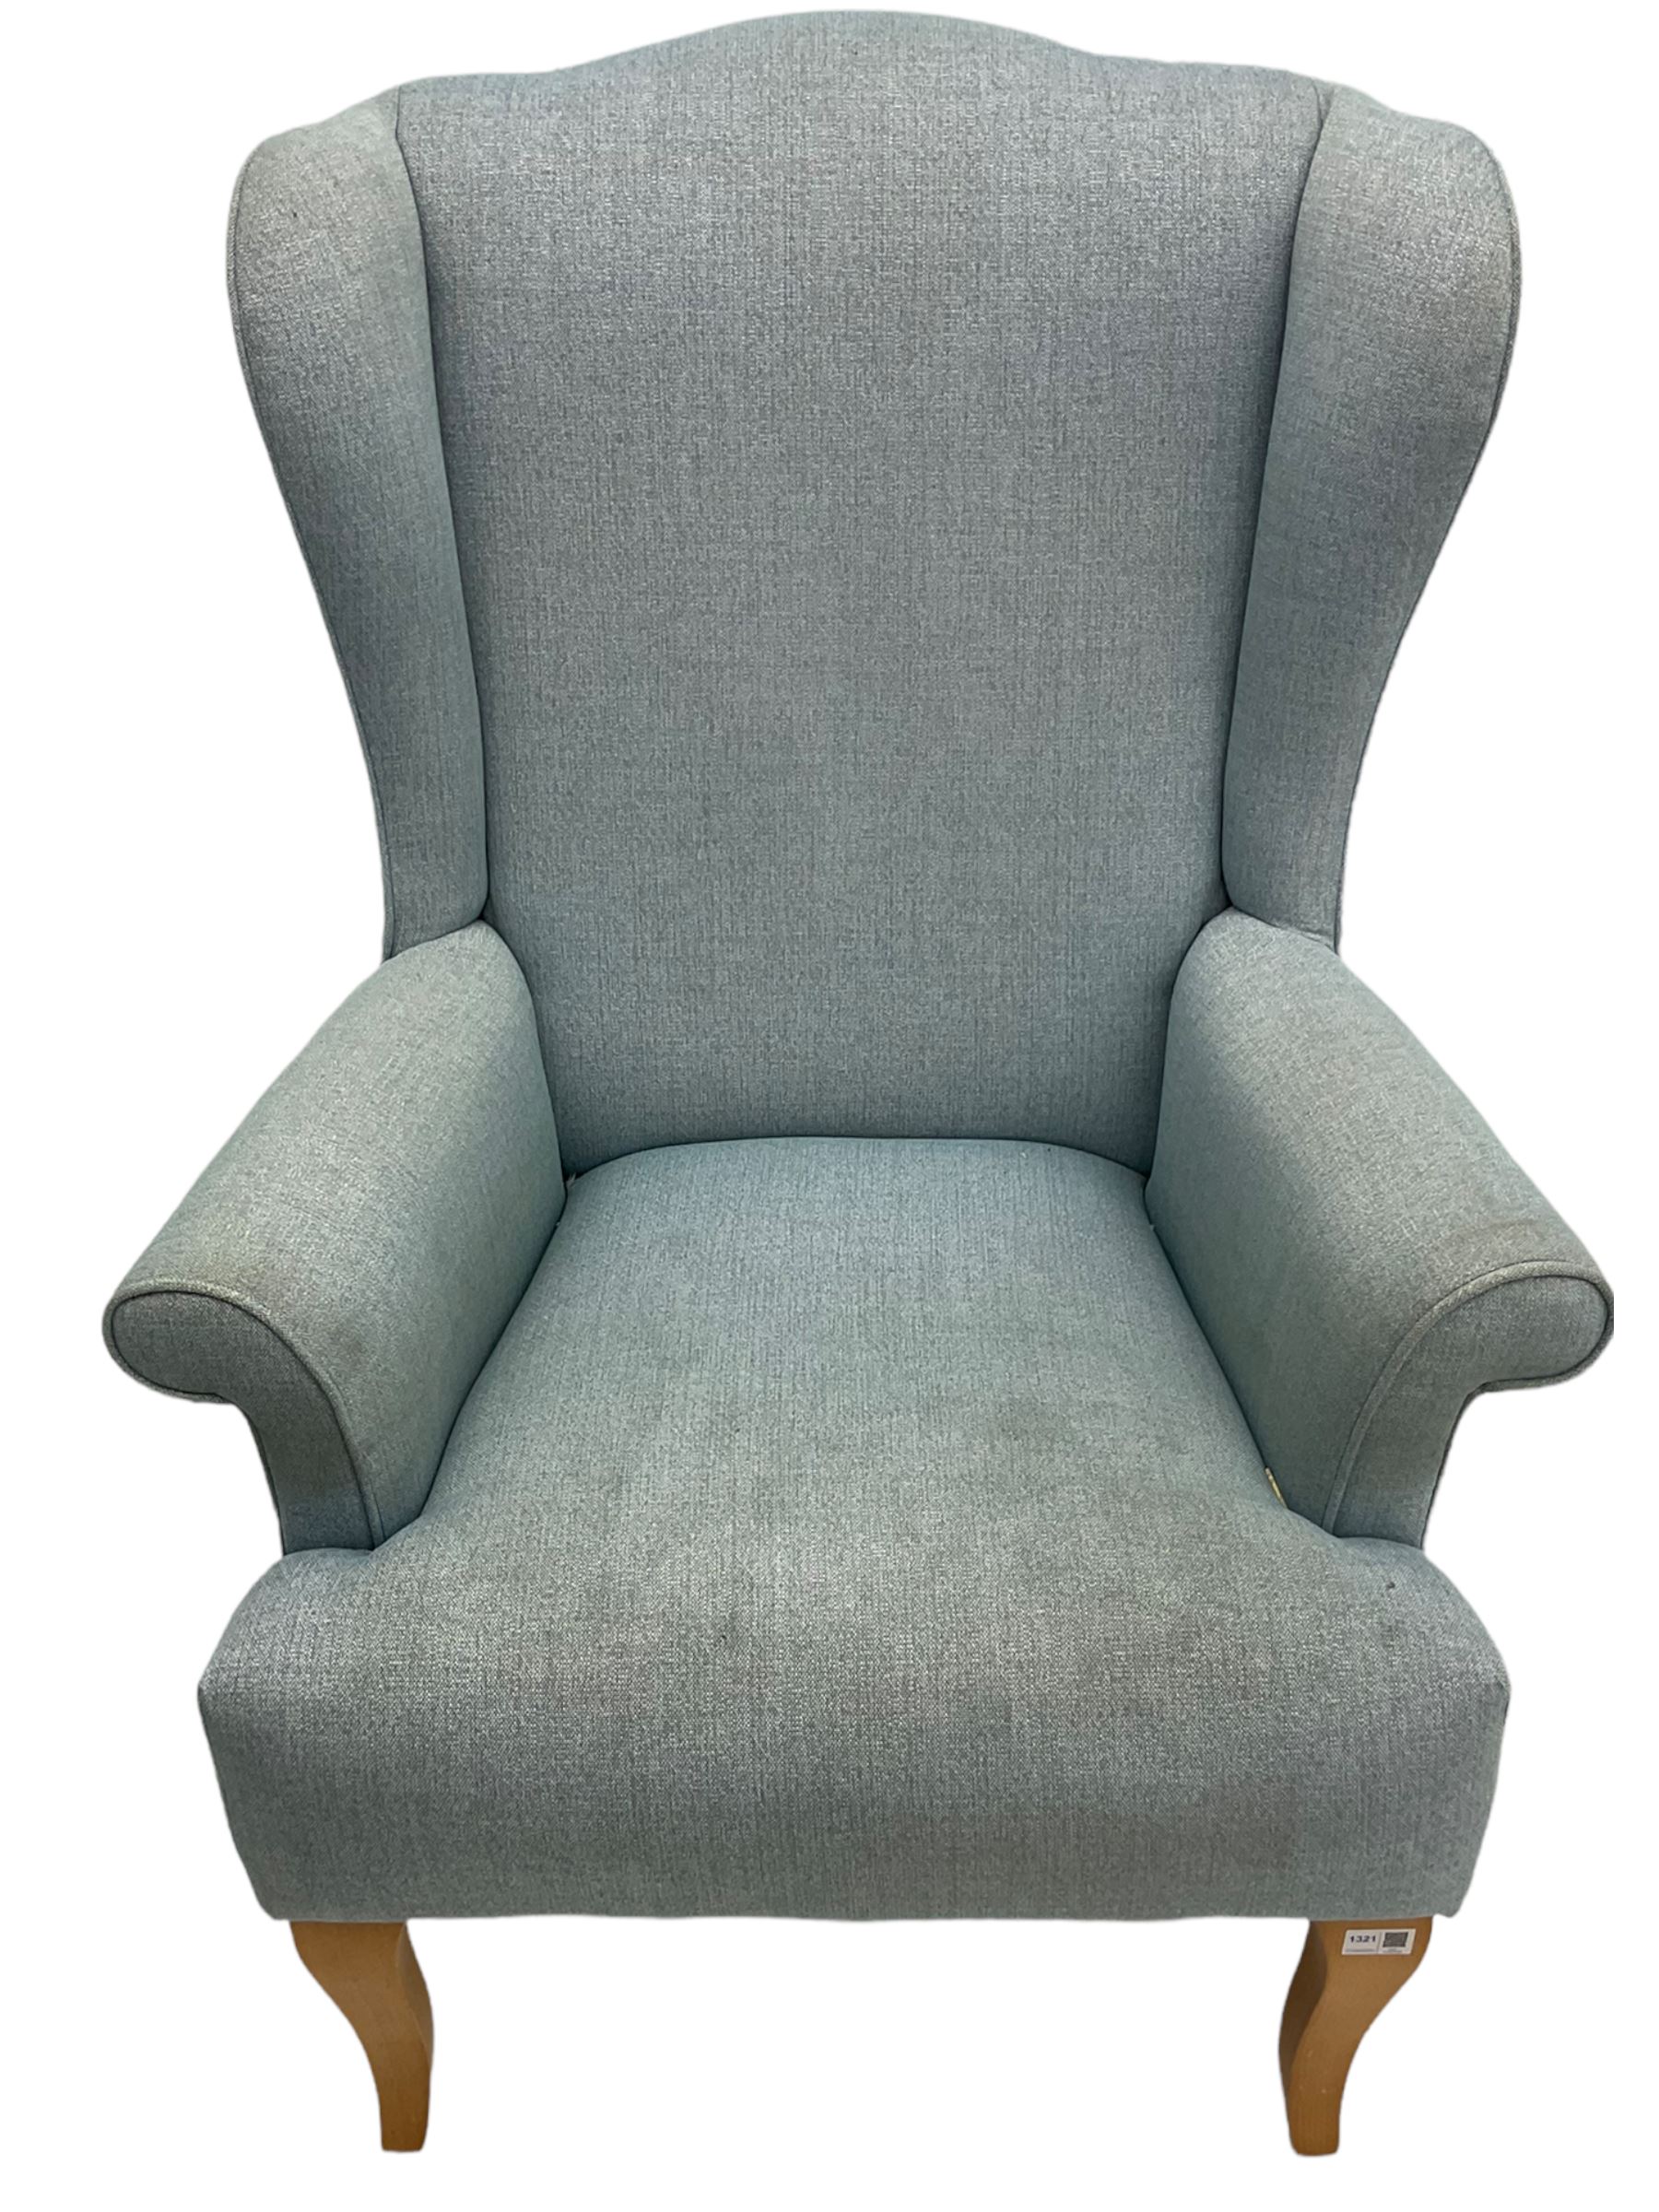 John Lewis high wing back armchair upholstered in denim cover - Image 2 of 6